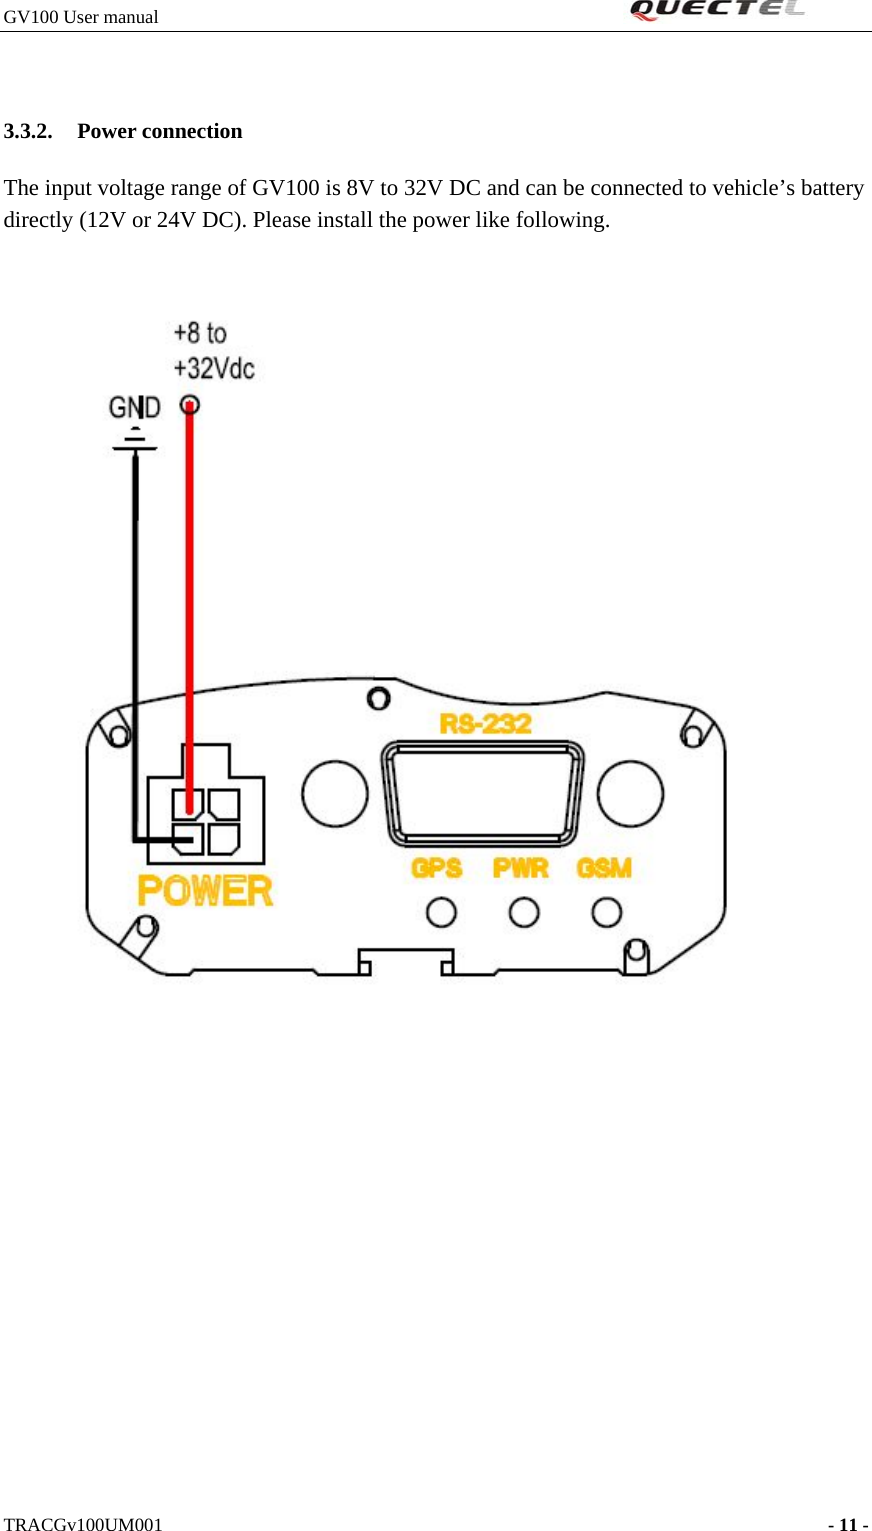 GV100 User manual                                                               3.3.2. Power connection   The input voltage range of GV100 is 8V to 32V DC and can be connected to vehicle’s battery directly (12V or 24V DC). Please install the power like following.                 TRACGv100UM001                                                                    - 11 -   